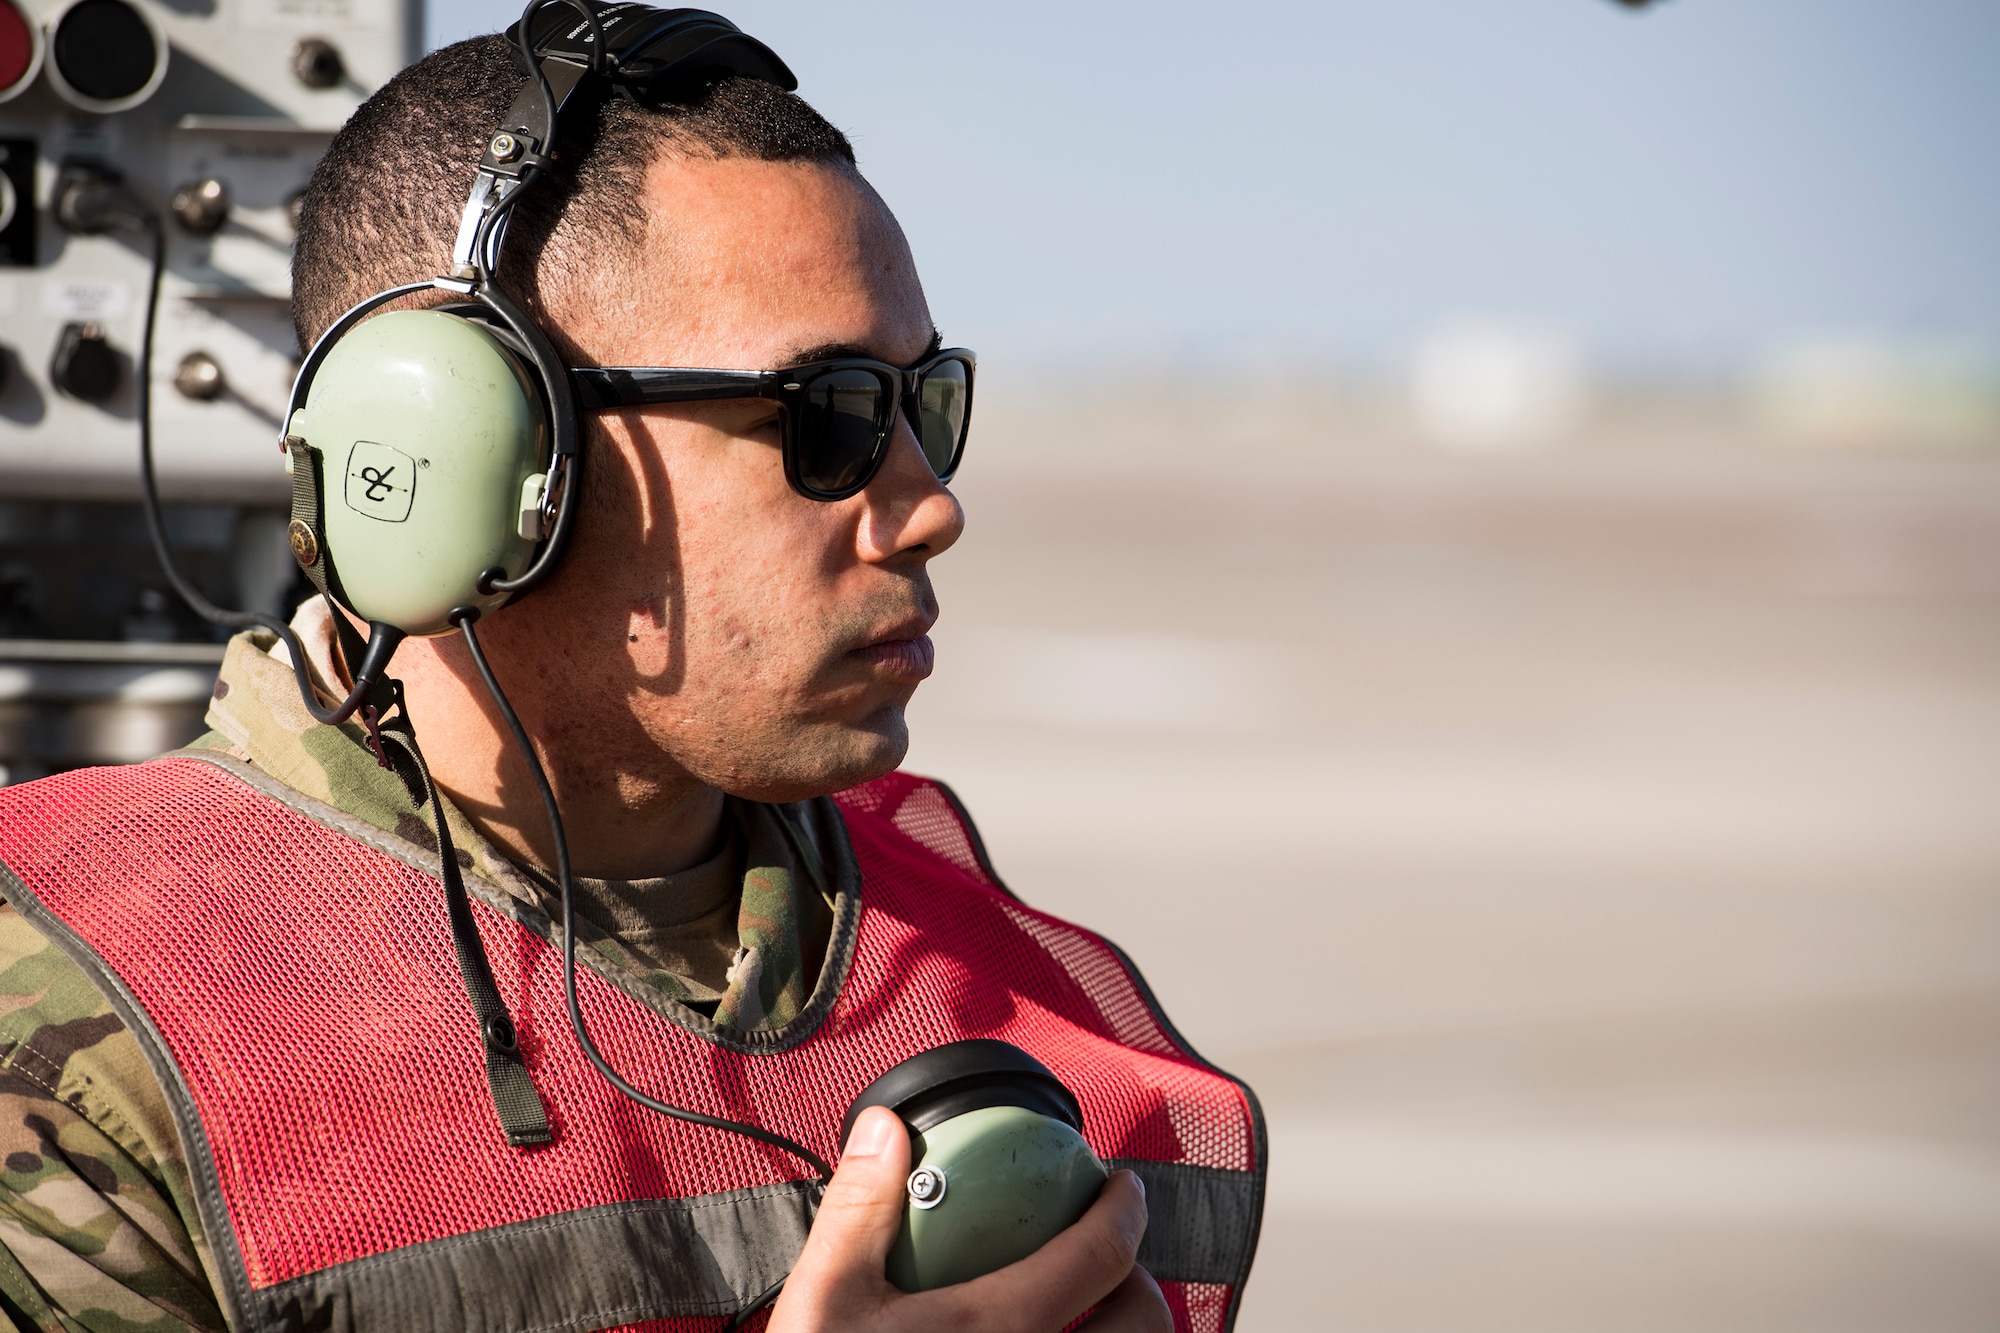 Staff Sgt. Jeff Jordan, 728th Air Mobility Squadron Maintenance Section crew chief, communicates with the pilot prior to aircraft takeoff March 19, 2019, at Incirlik Air Base, Turkey. When the maintenance section gives an all clear, Jordan communicates to the pilot they are cleared to start engines. The Aircraft Maintenance Flight projects Air Mobility Command’s global air mobility mission by executing flight line operations to generate, launch, recover, service and repair C-17 Globemaster III, C-5 Galaxy, and other commercial cargo aircraft. (U.S. Air Force photo by Staff Sgt. Ceaira Tinsley)